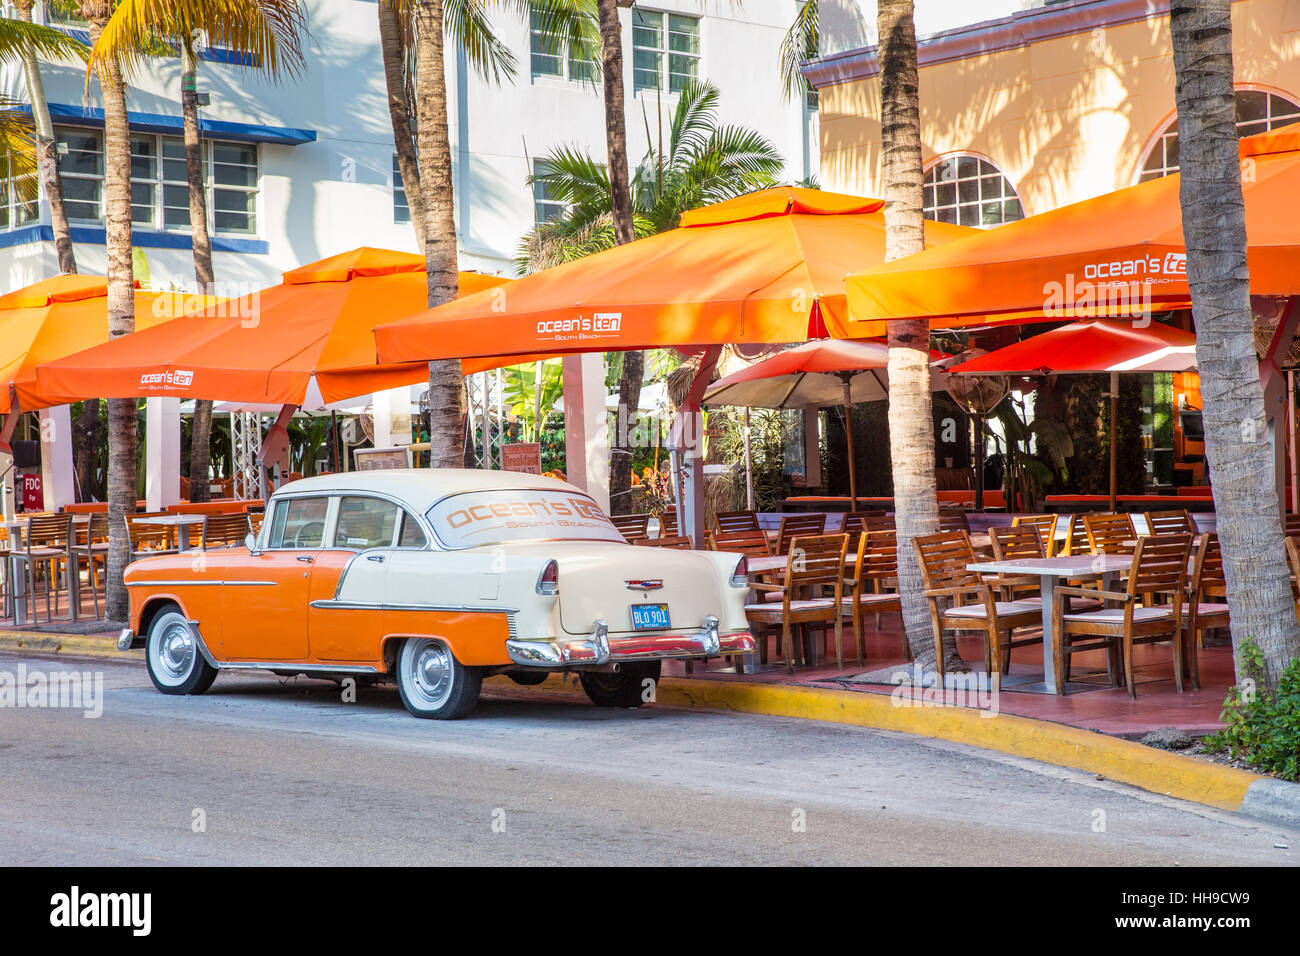 View along the famous vacation and tourist location on Ocean Drive in the Art Deco district of South Beach, Miami on a sunny day Stock Photo